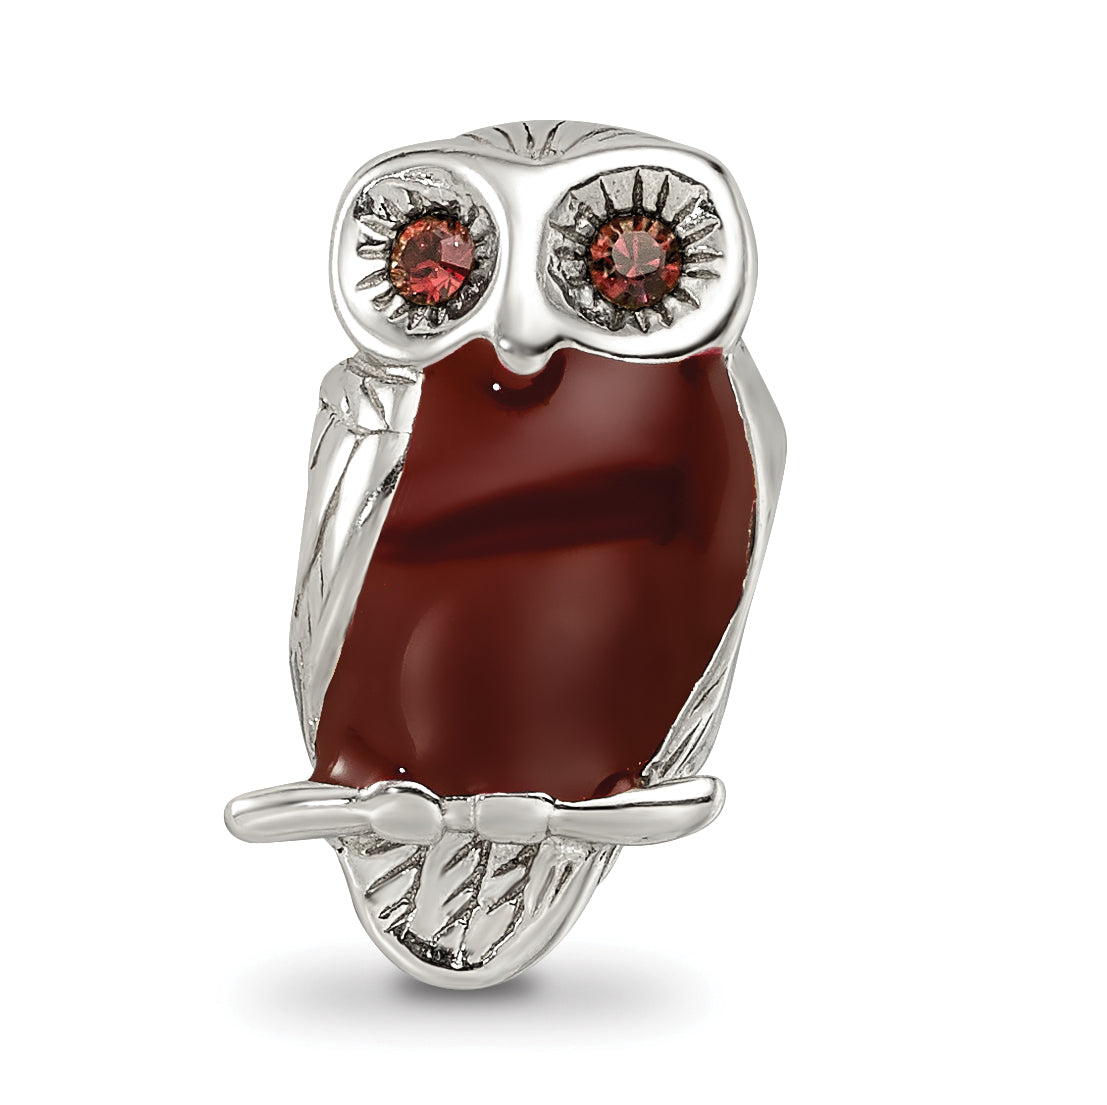 Sterling Silver Reflections Brown Enameled Wise Owl Bead